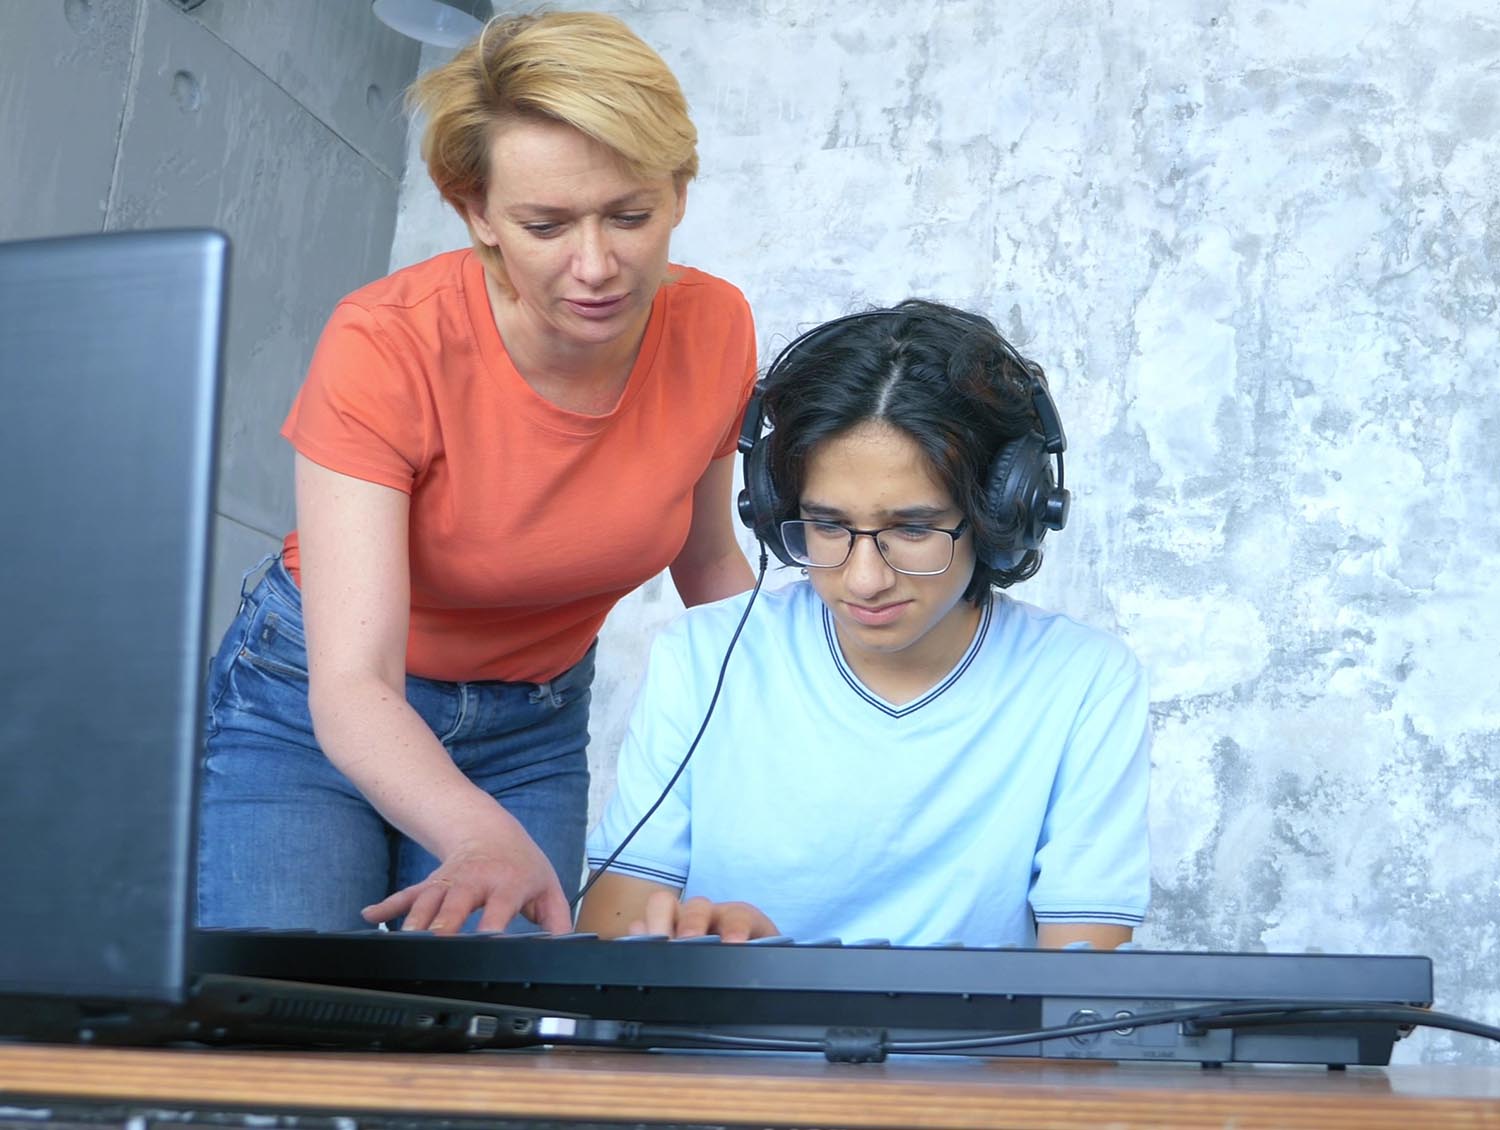 Teacher and student with headphones composing music